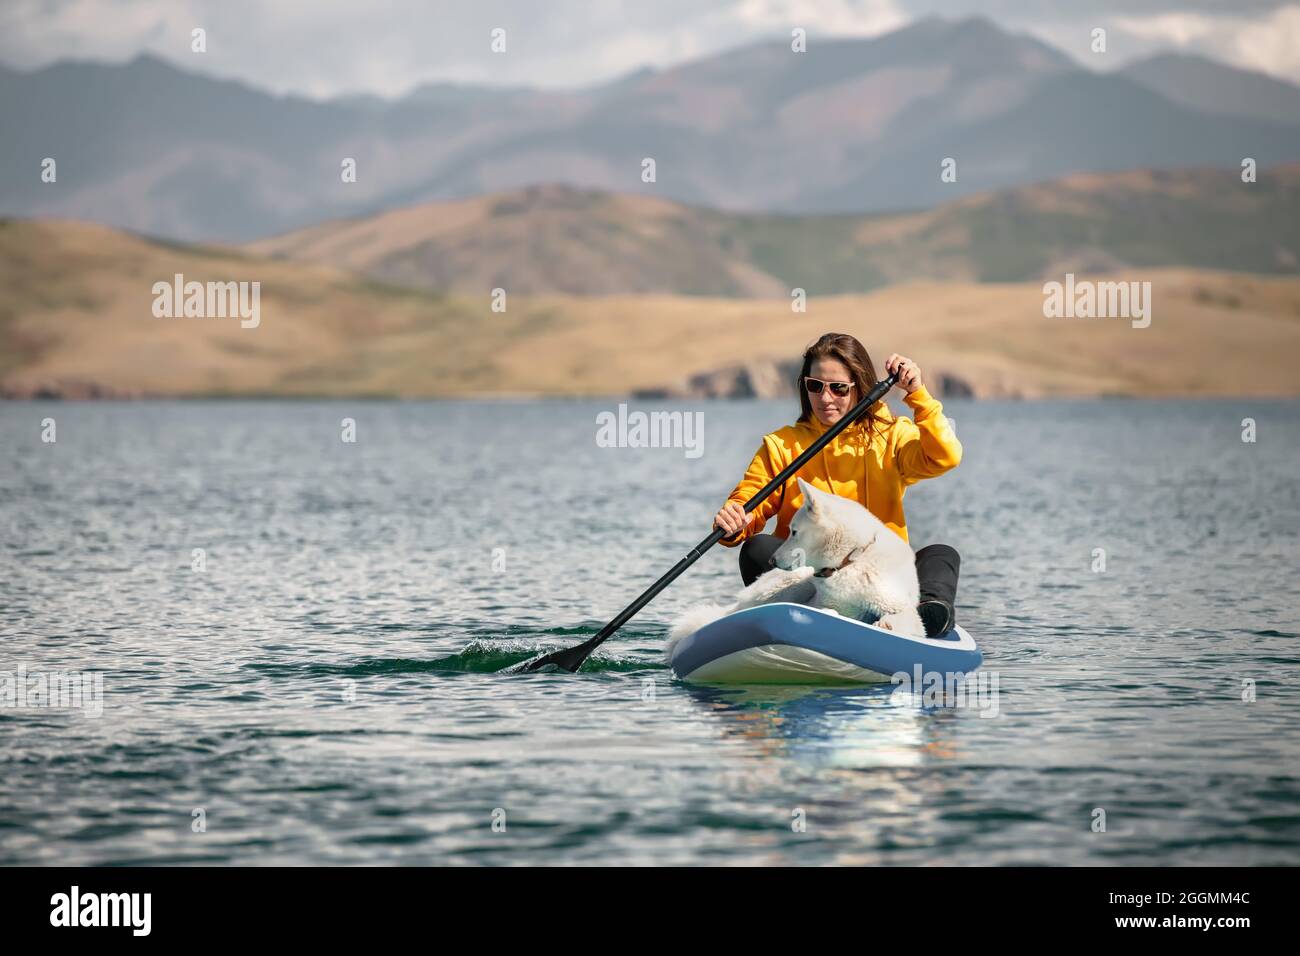 Girl walks on stand up paddle board at mountain lake with white siberian dog. Travel concept Stock Photo